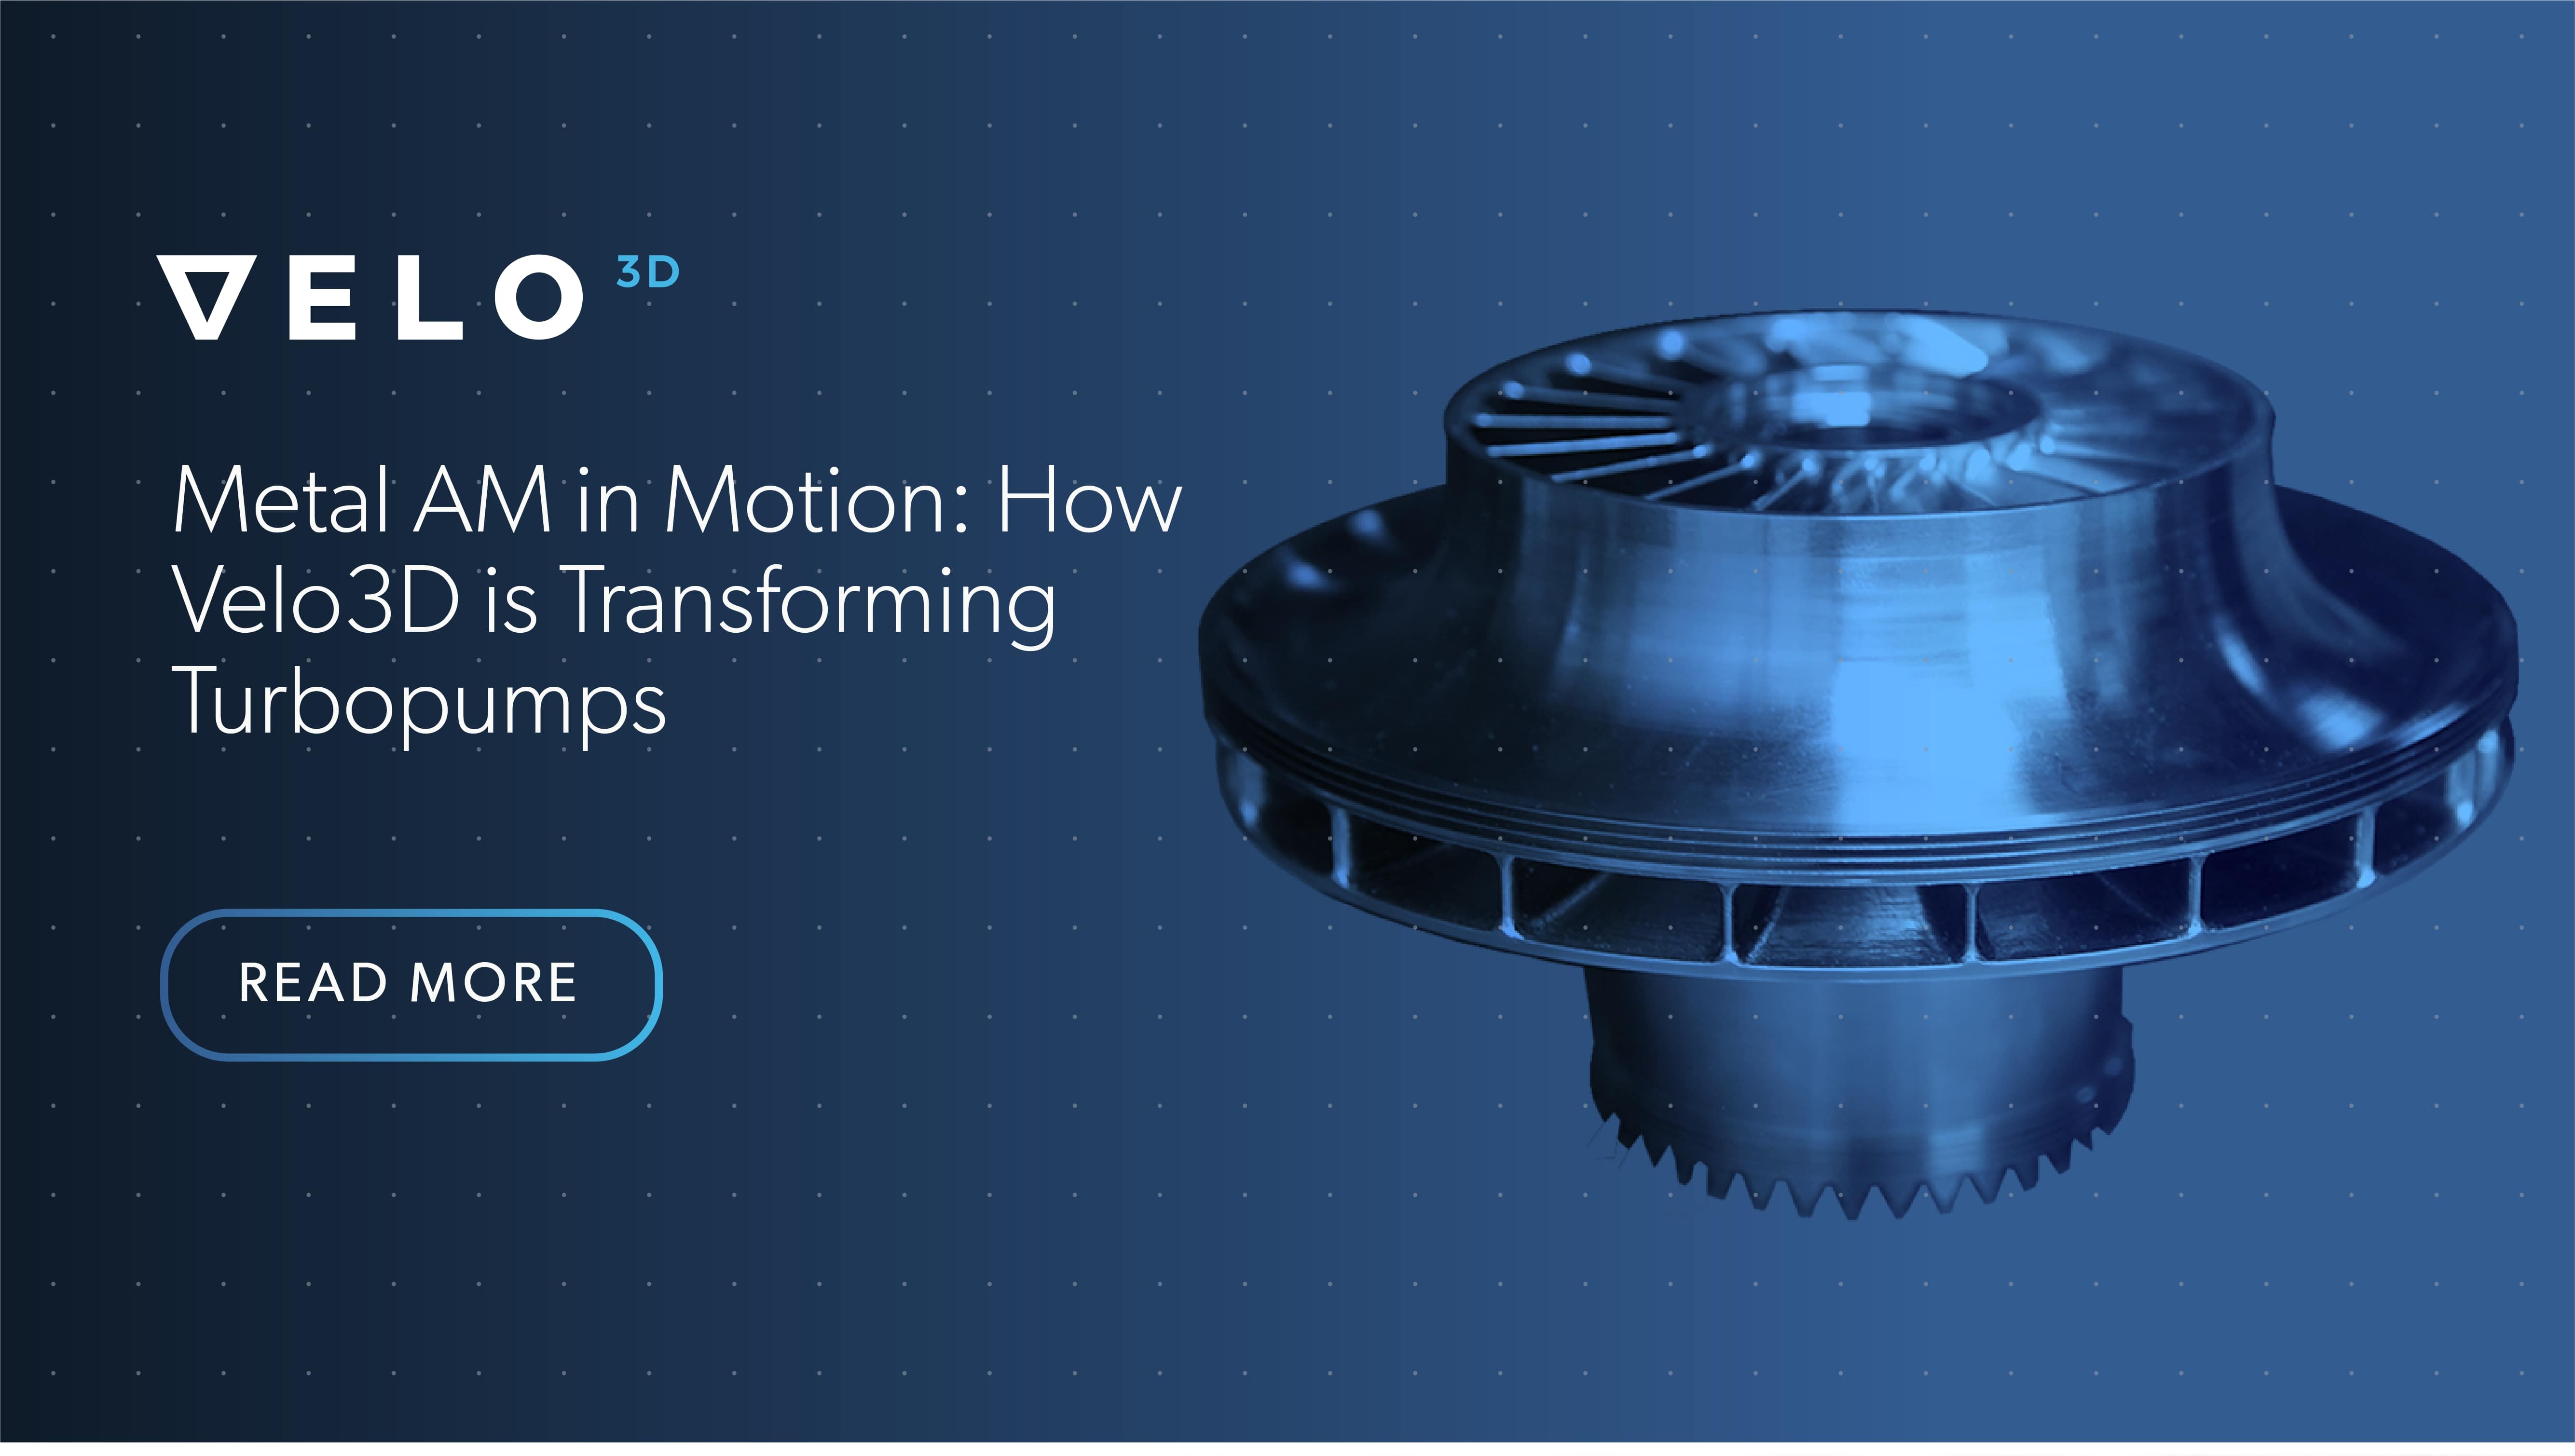 Metal AM in Motion: How Velo3D is Transforming Turbopumps